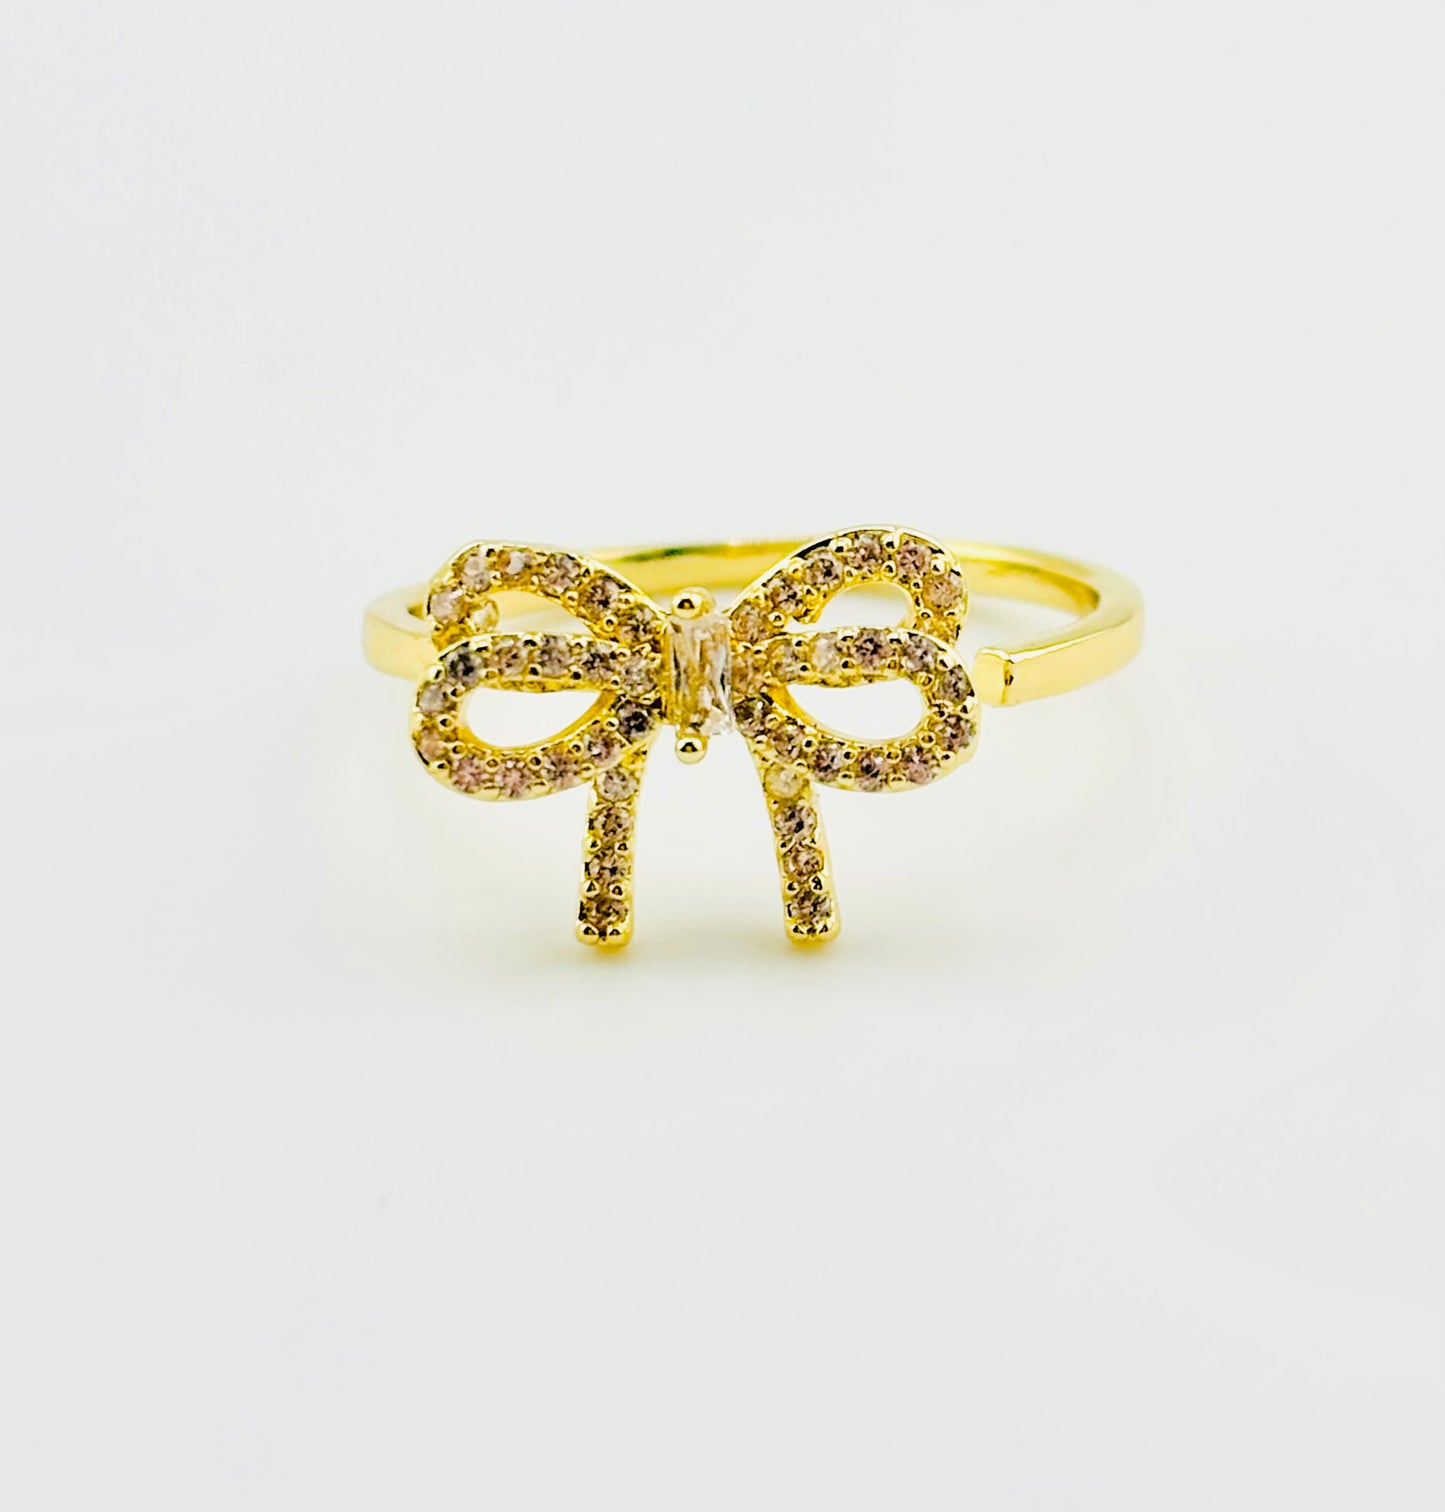 Coquete 18k gold filled ring with rhinestones